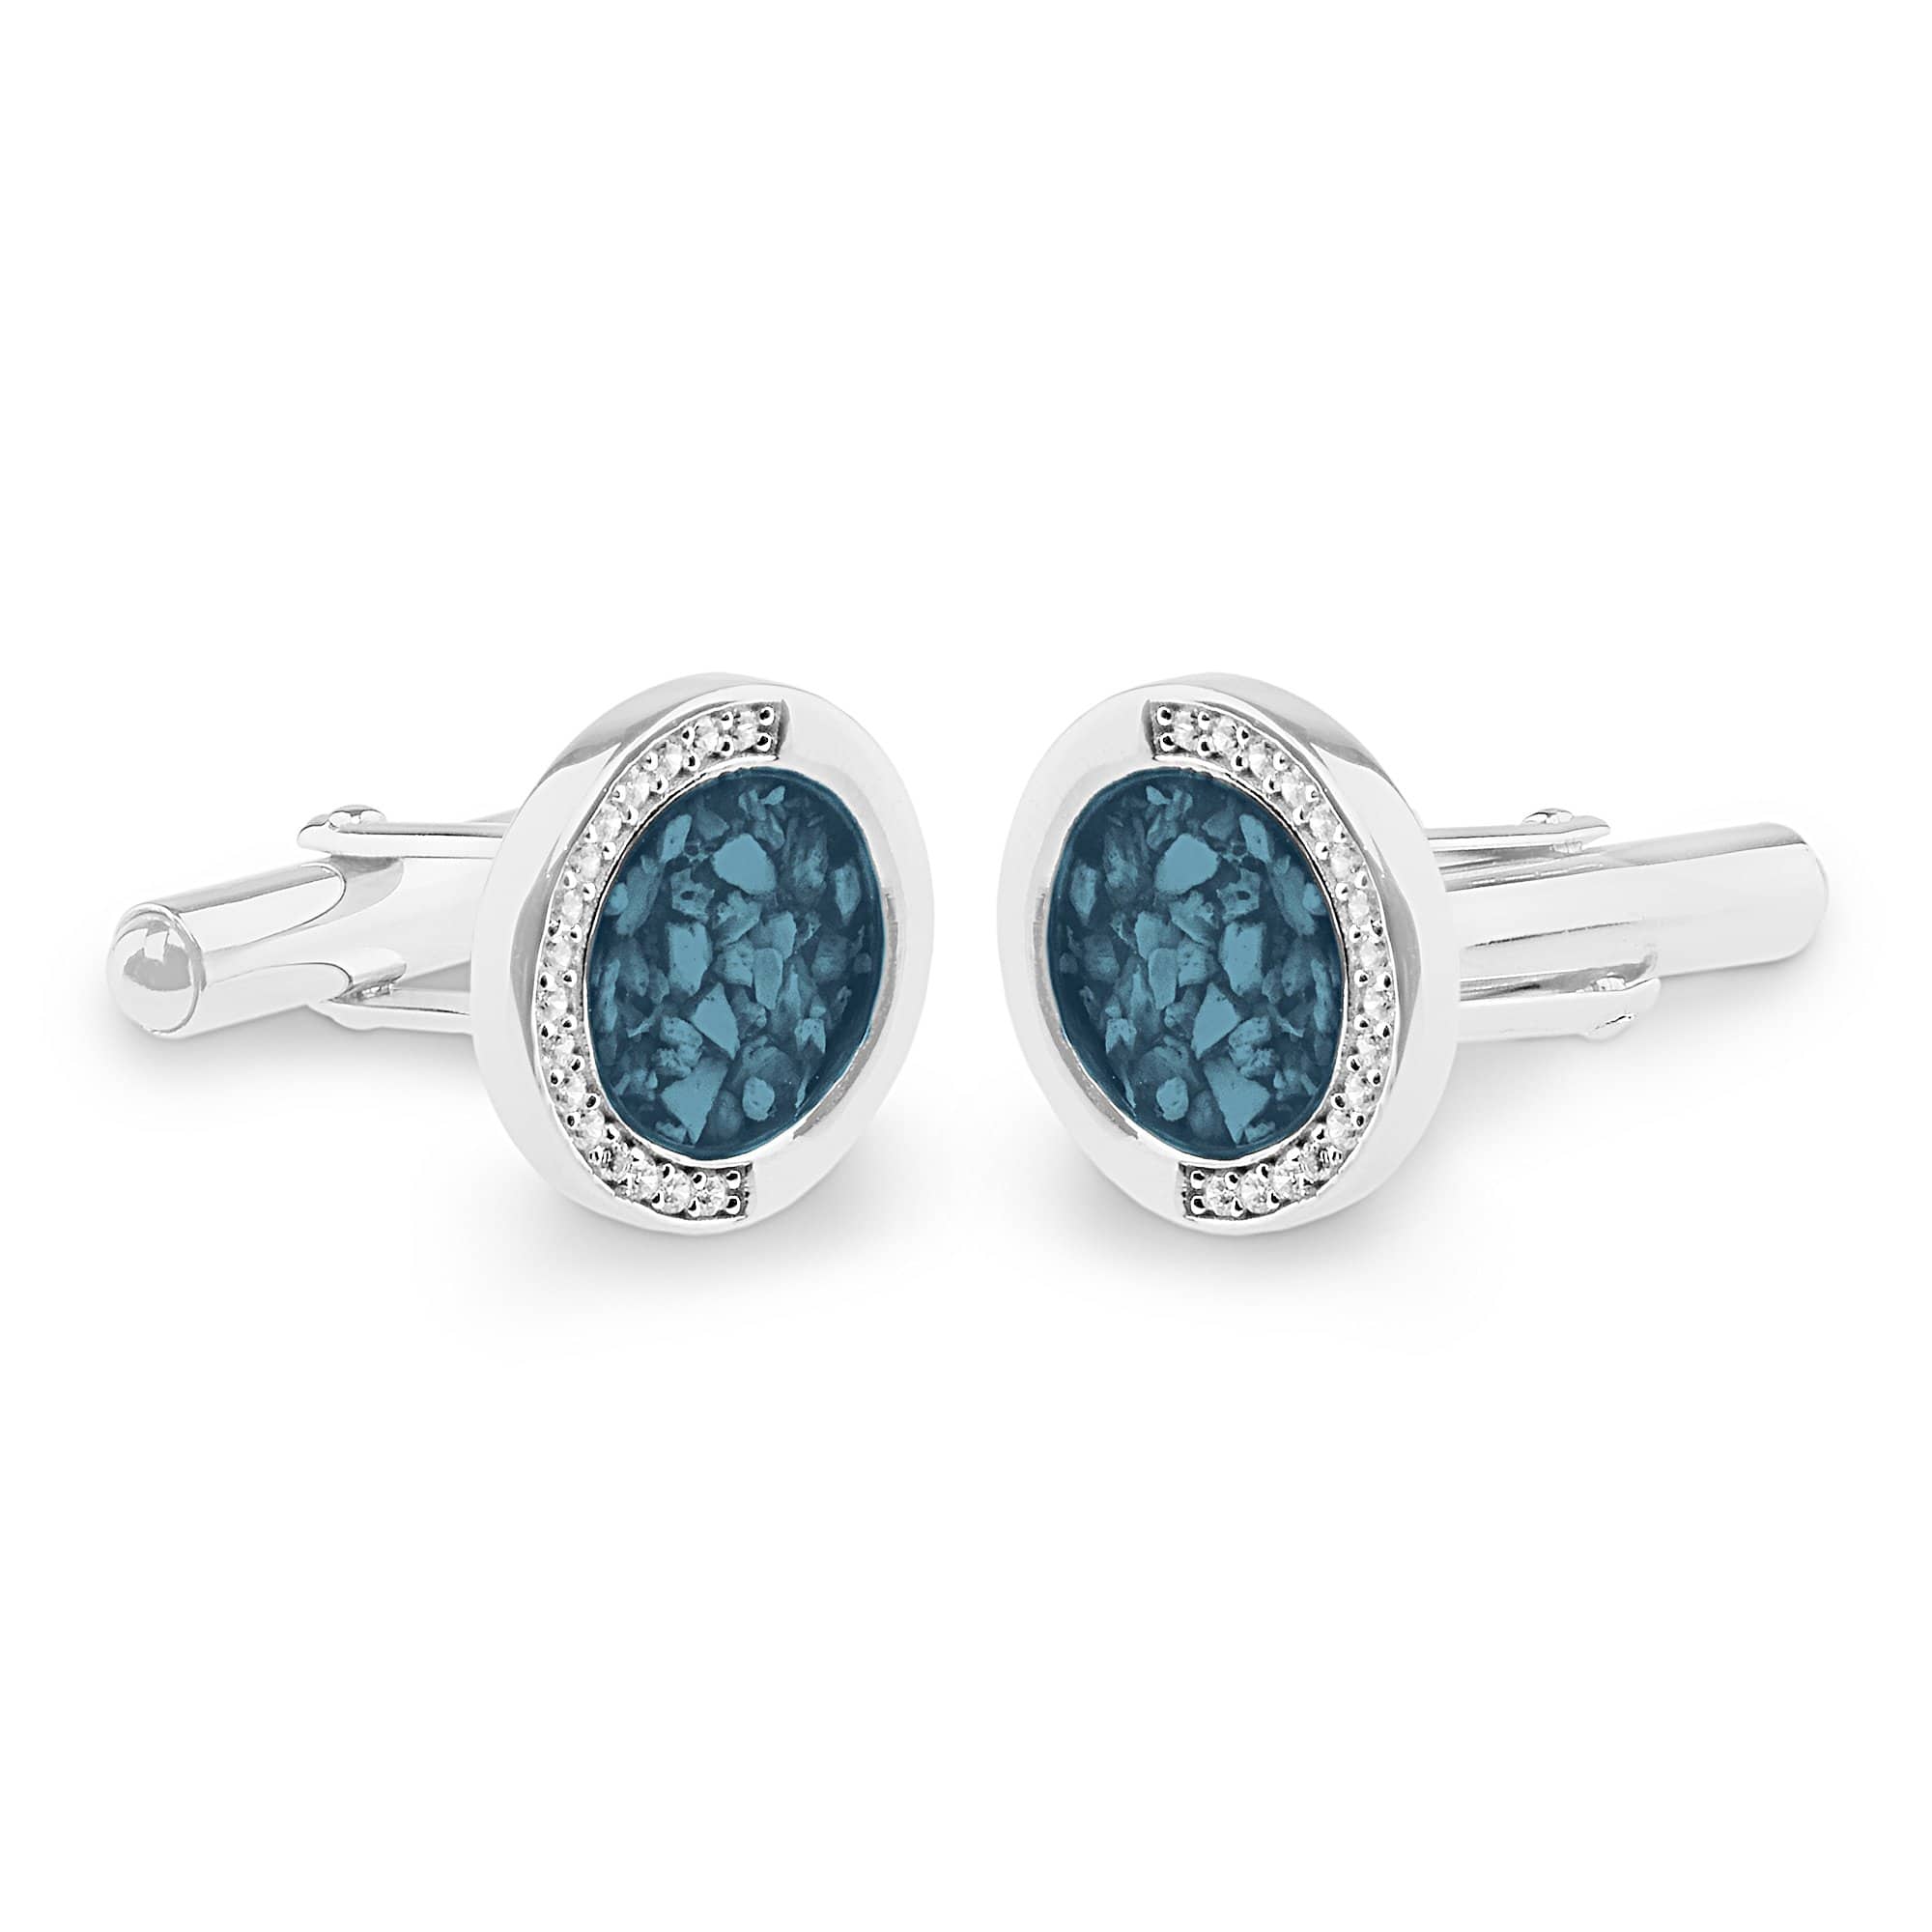 Gents Fancy Round Memorial Ashes Cufflinks with Fine Crystals